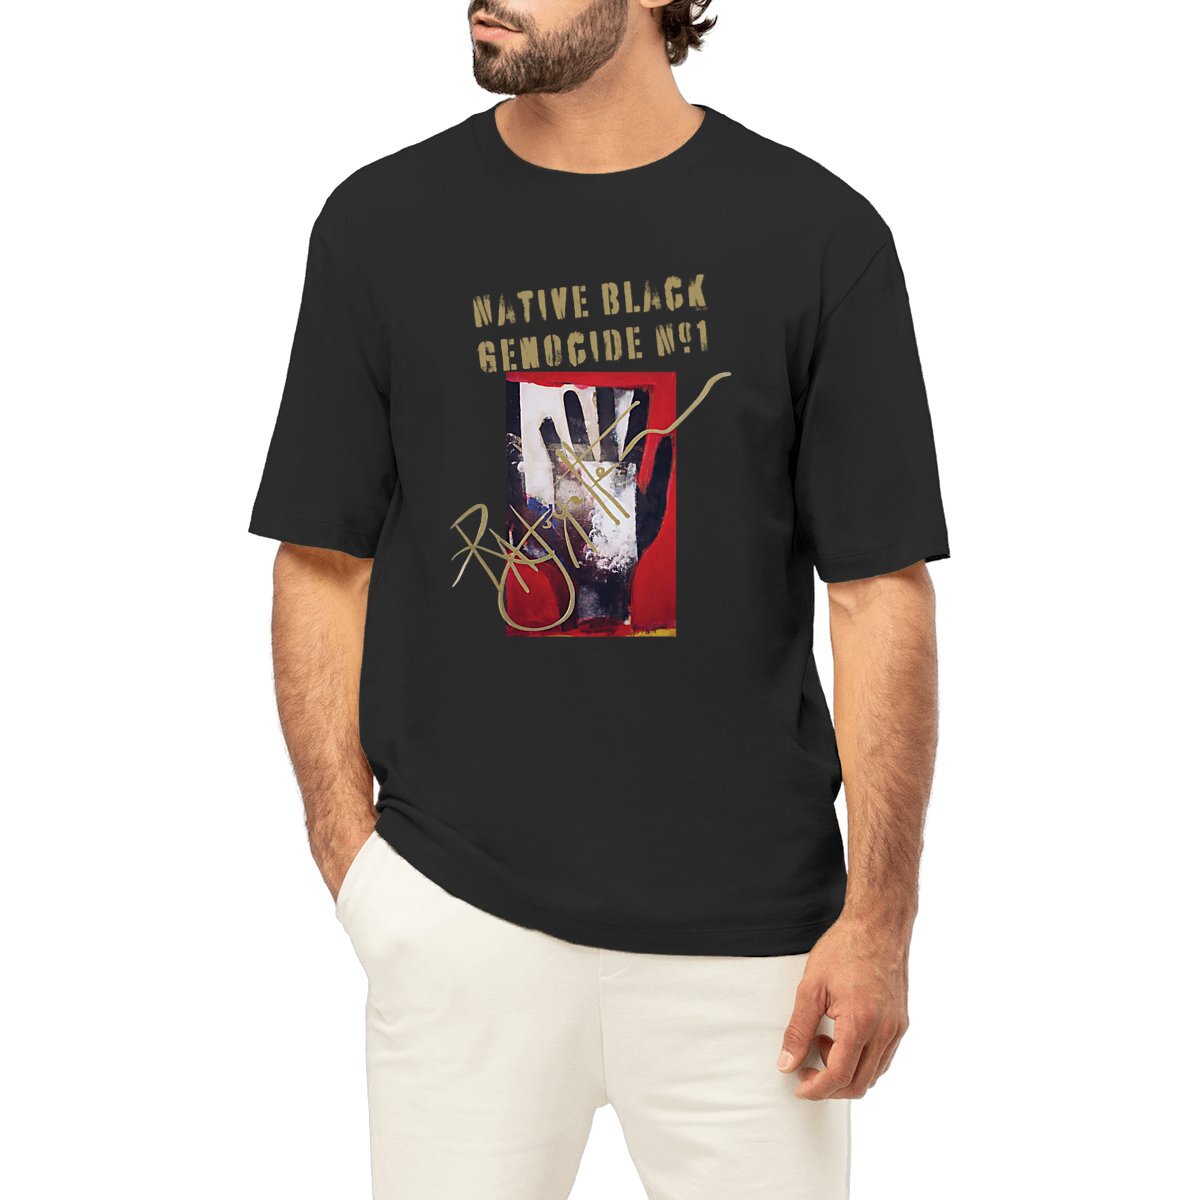 Native Black Genocide #1 Premium Men's Oversized Heavyweight T-shirt, 90% organic cotton, 10% recycled cotton, 200 g/m2, supports Black Indigenous communities.